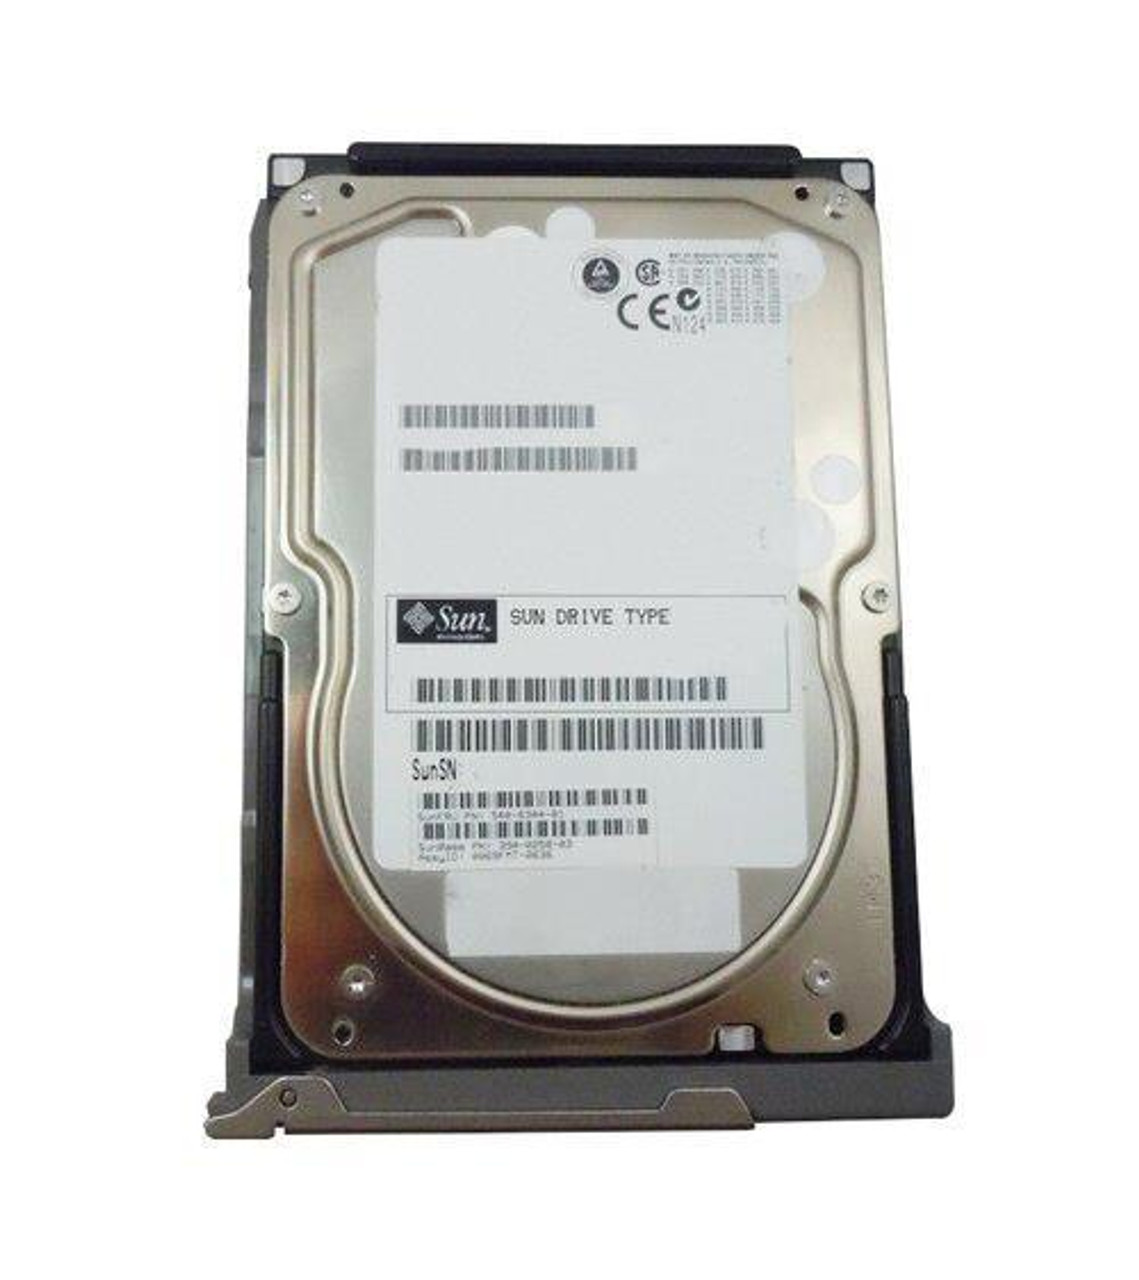 540-5206-14 Sun 73GB 10000RPM Fibre Channel 2Gbps 3.5-inch Internal Hard Drive with Bracket for Fire Server